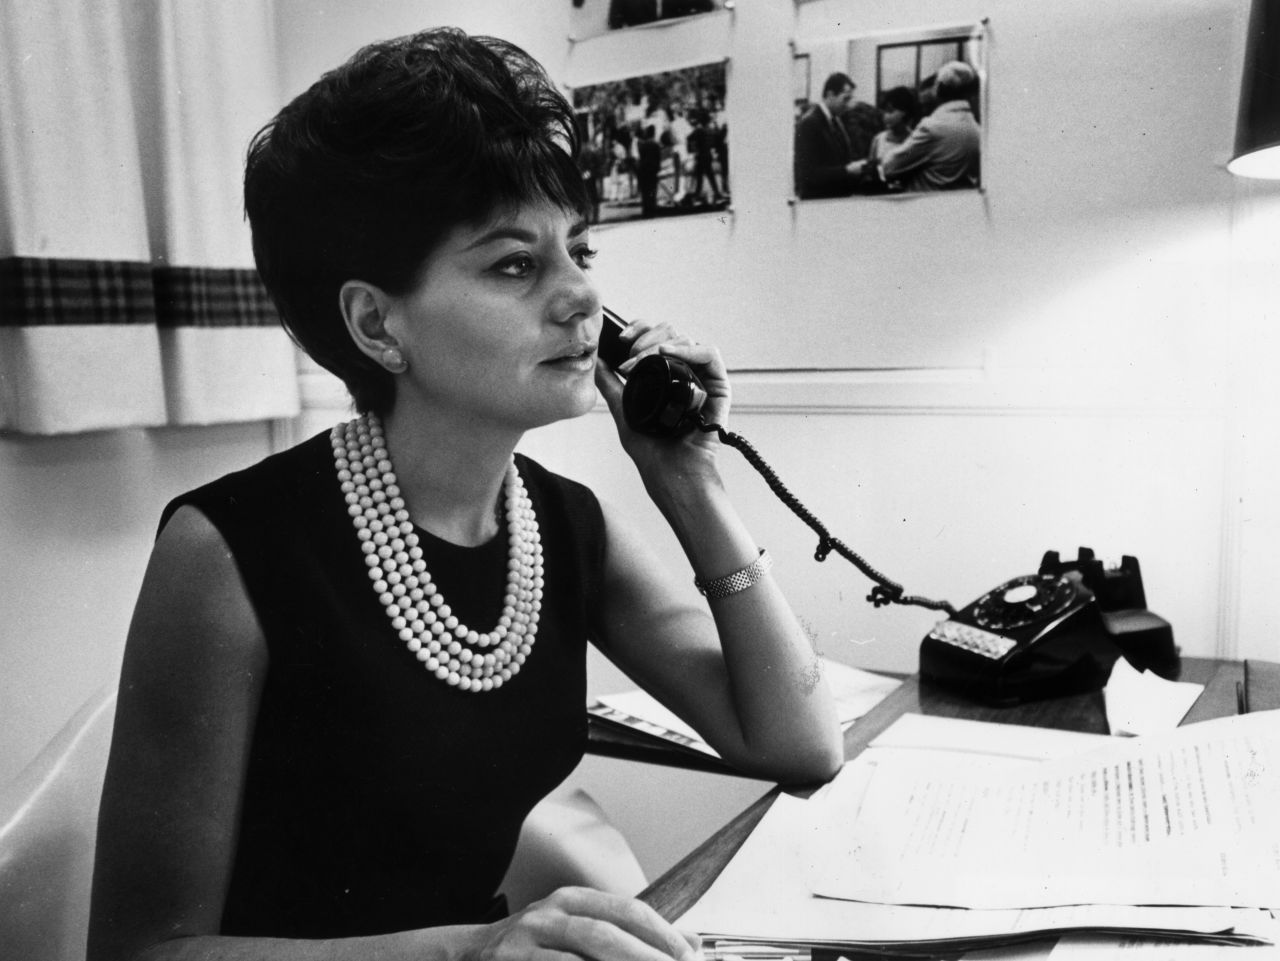 Walters takes a phone call at her desk in New York in 1962. In 1961, she started working as a reporter, writer and panel member on NBC's "Today" show.